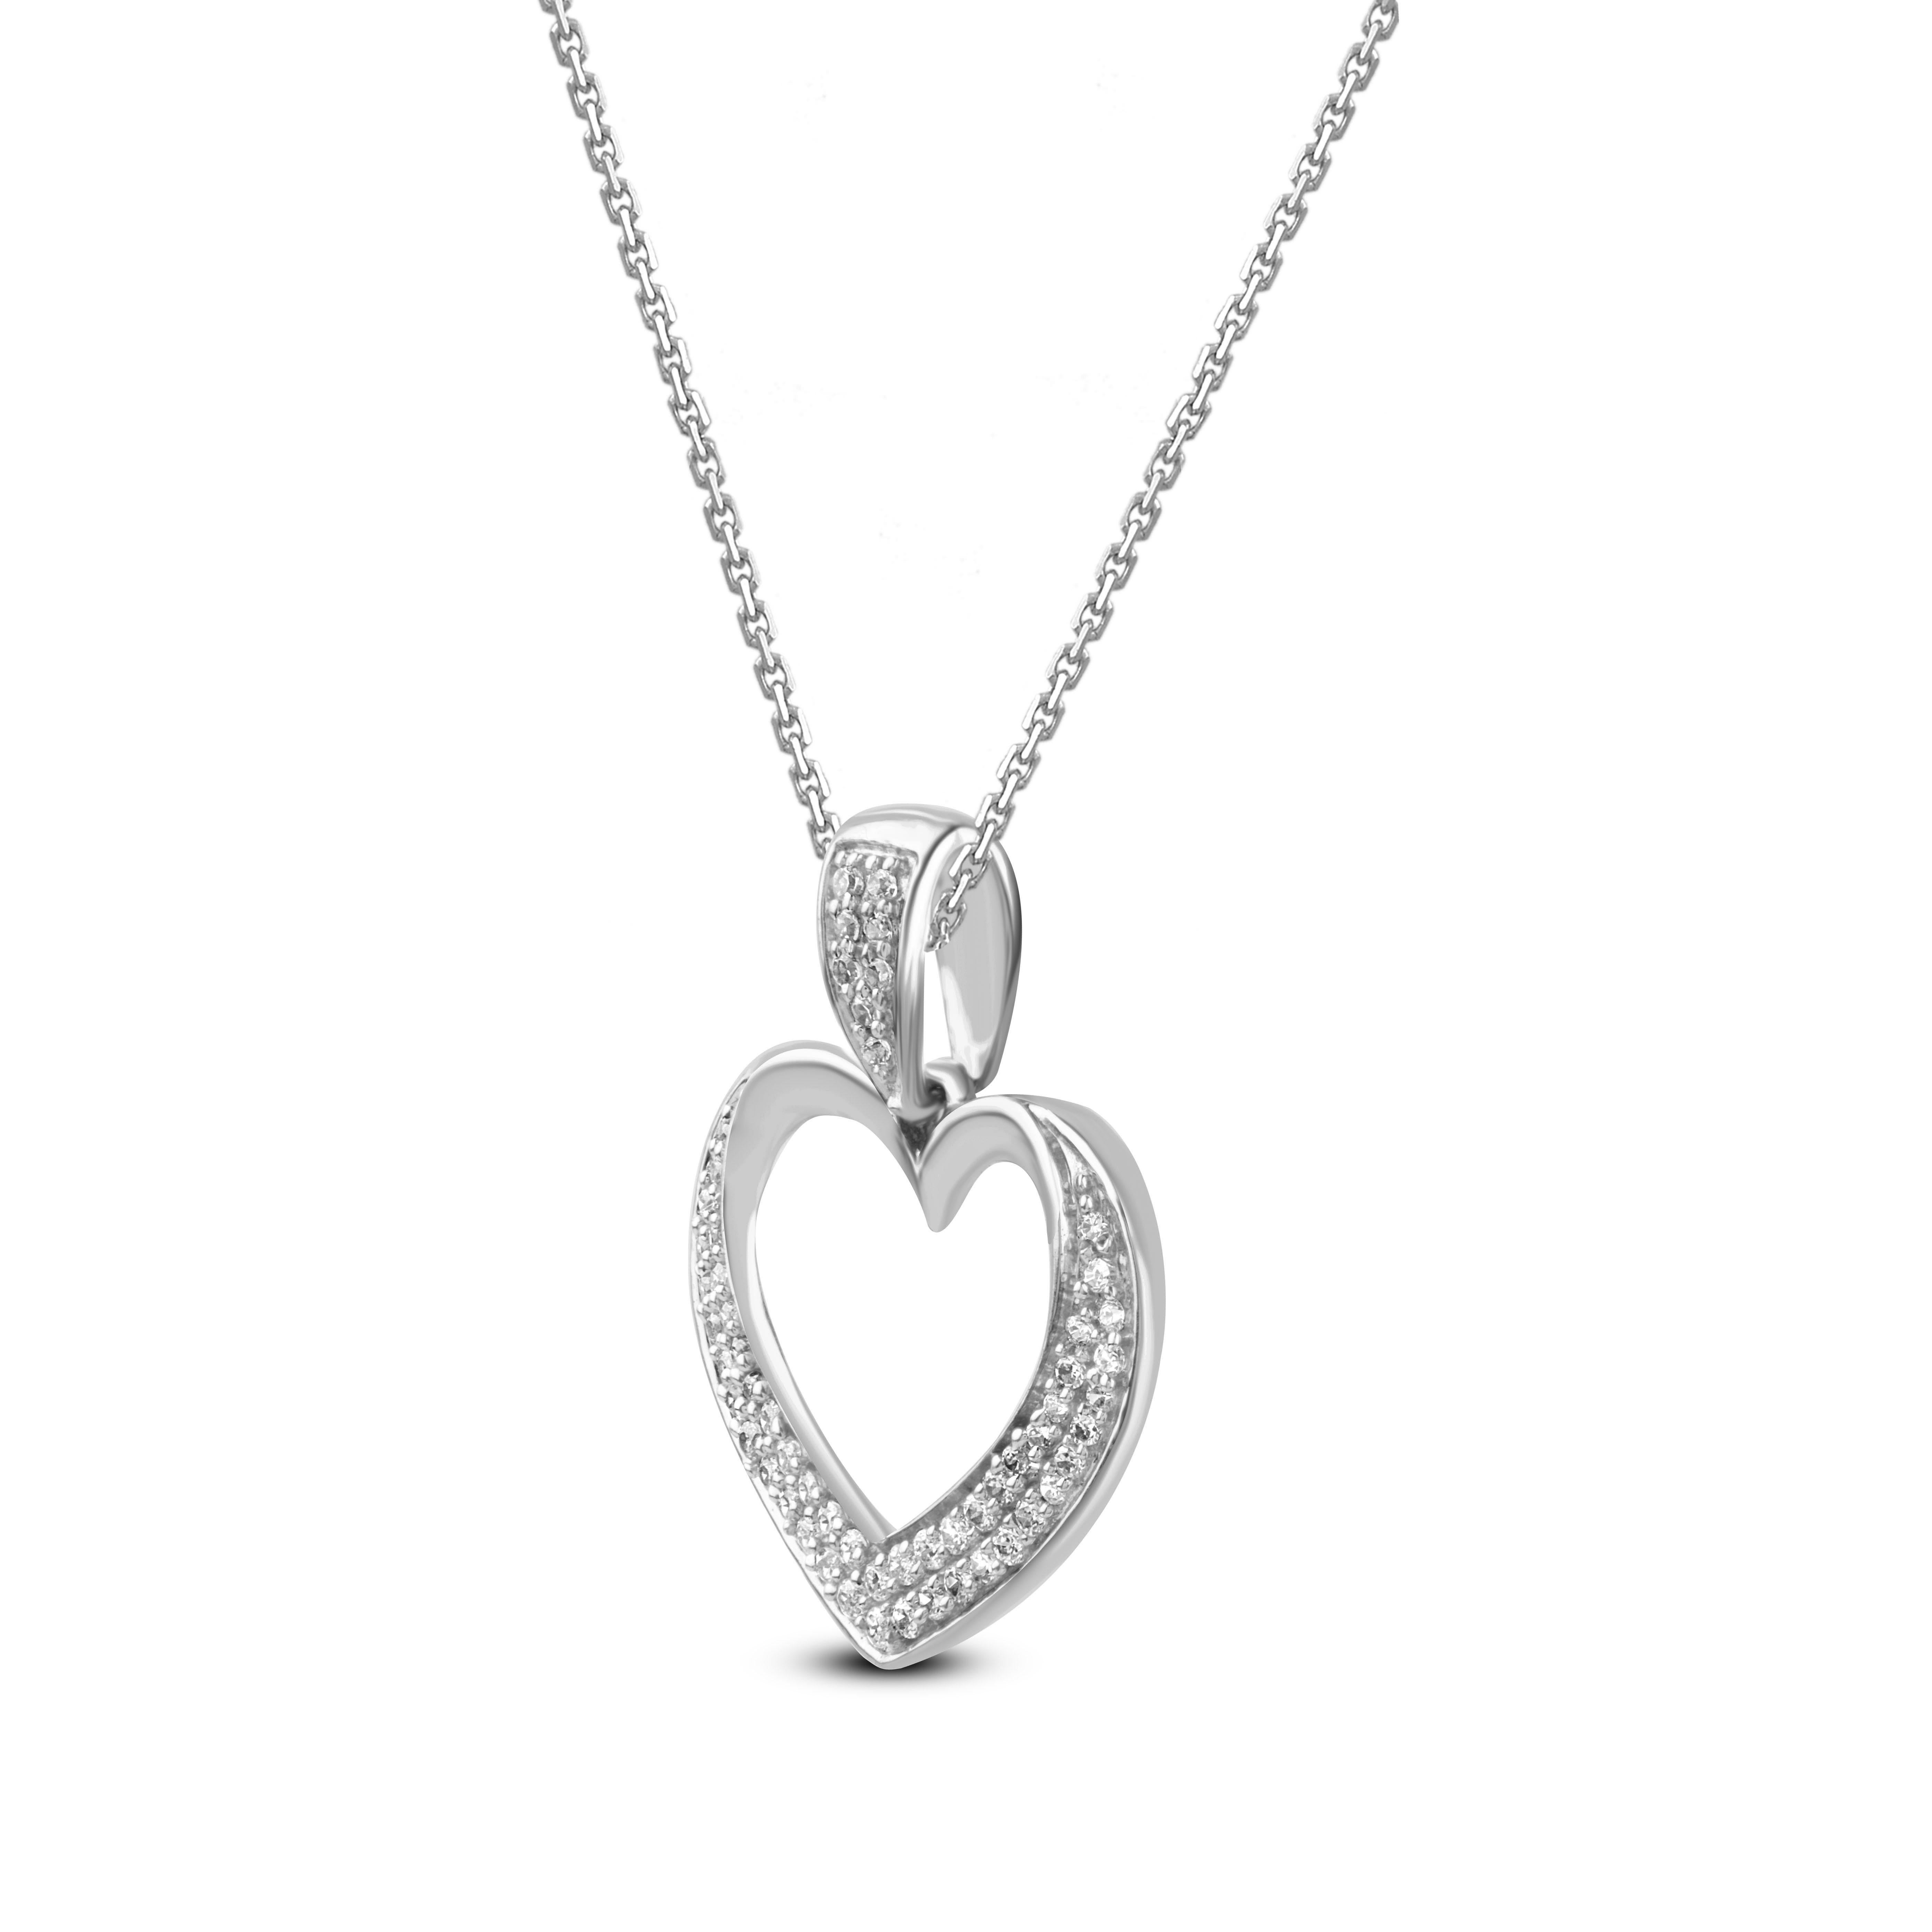 A striking addition when worn on its own, this diamond heart pendant makes a stunning impression. This pendant is crafted from 14-karat white gold and features 58 single cut diamonds set in prong setting. H-I color I2 clarity and a high polish